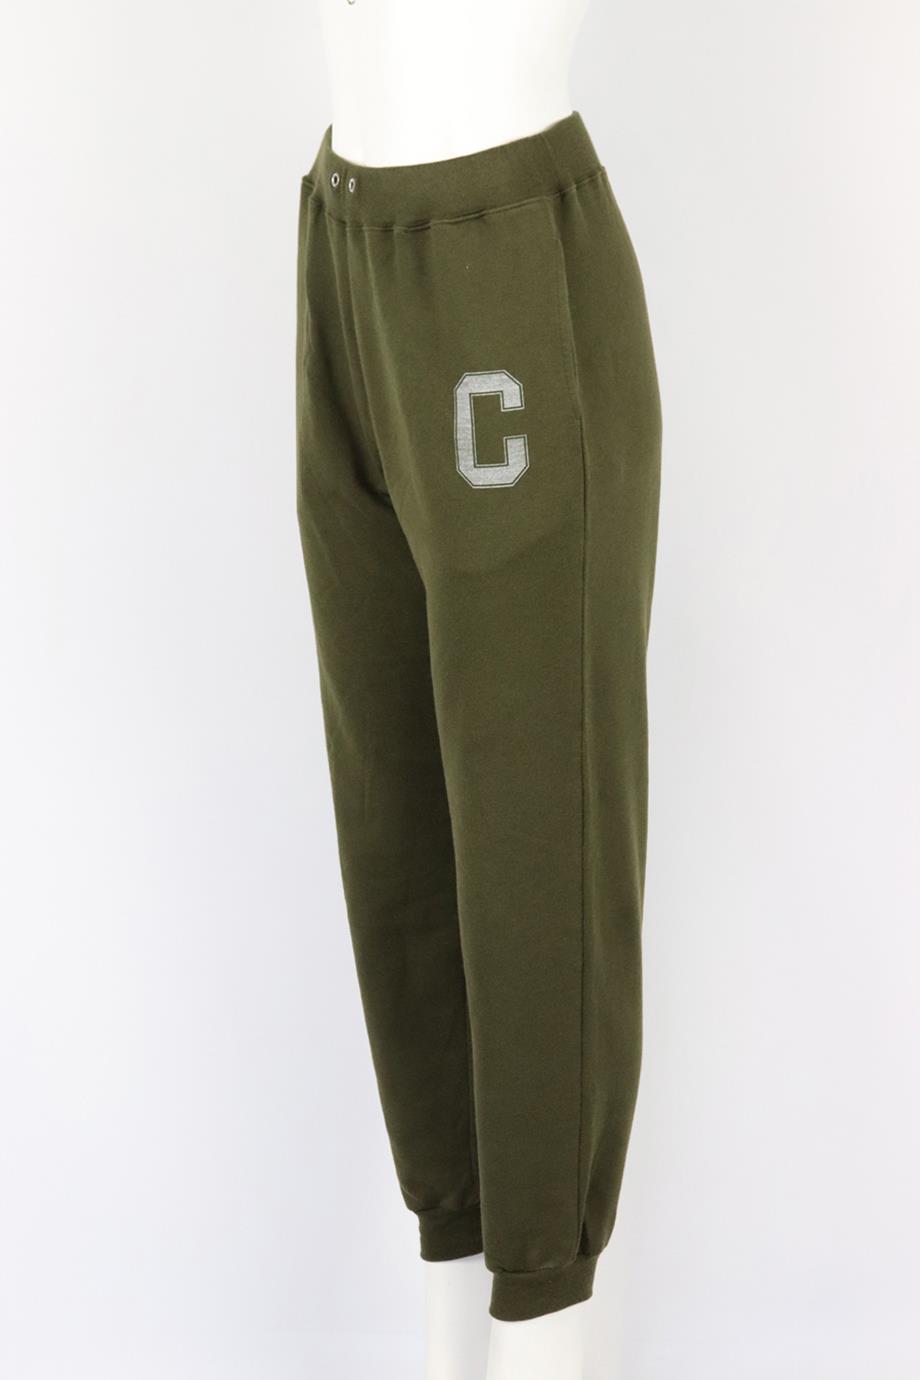 CELINE LOGO DETAILED COTTON TERRY TRACK PANTS SMALL